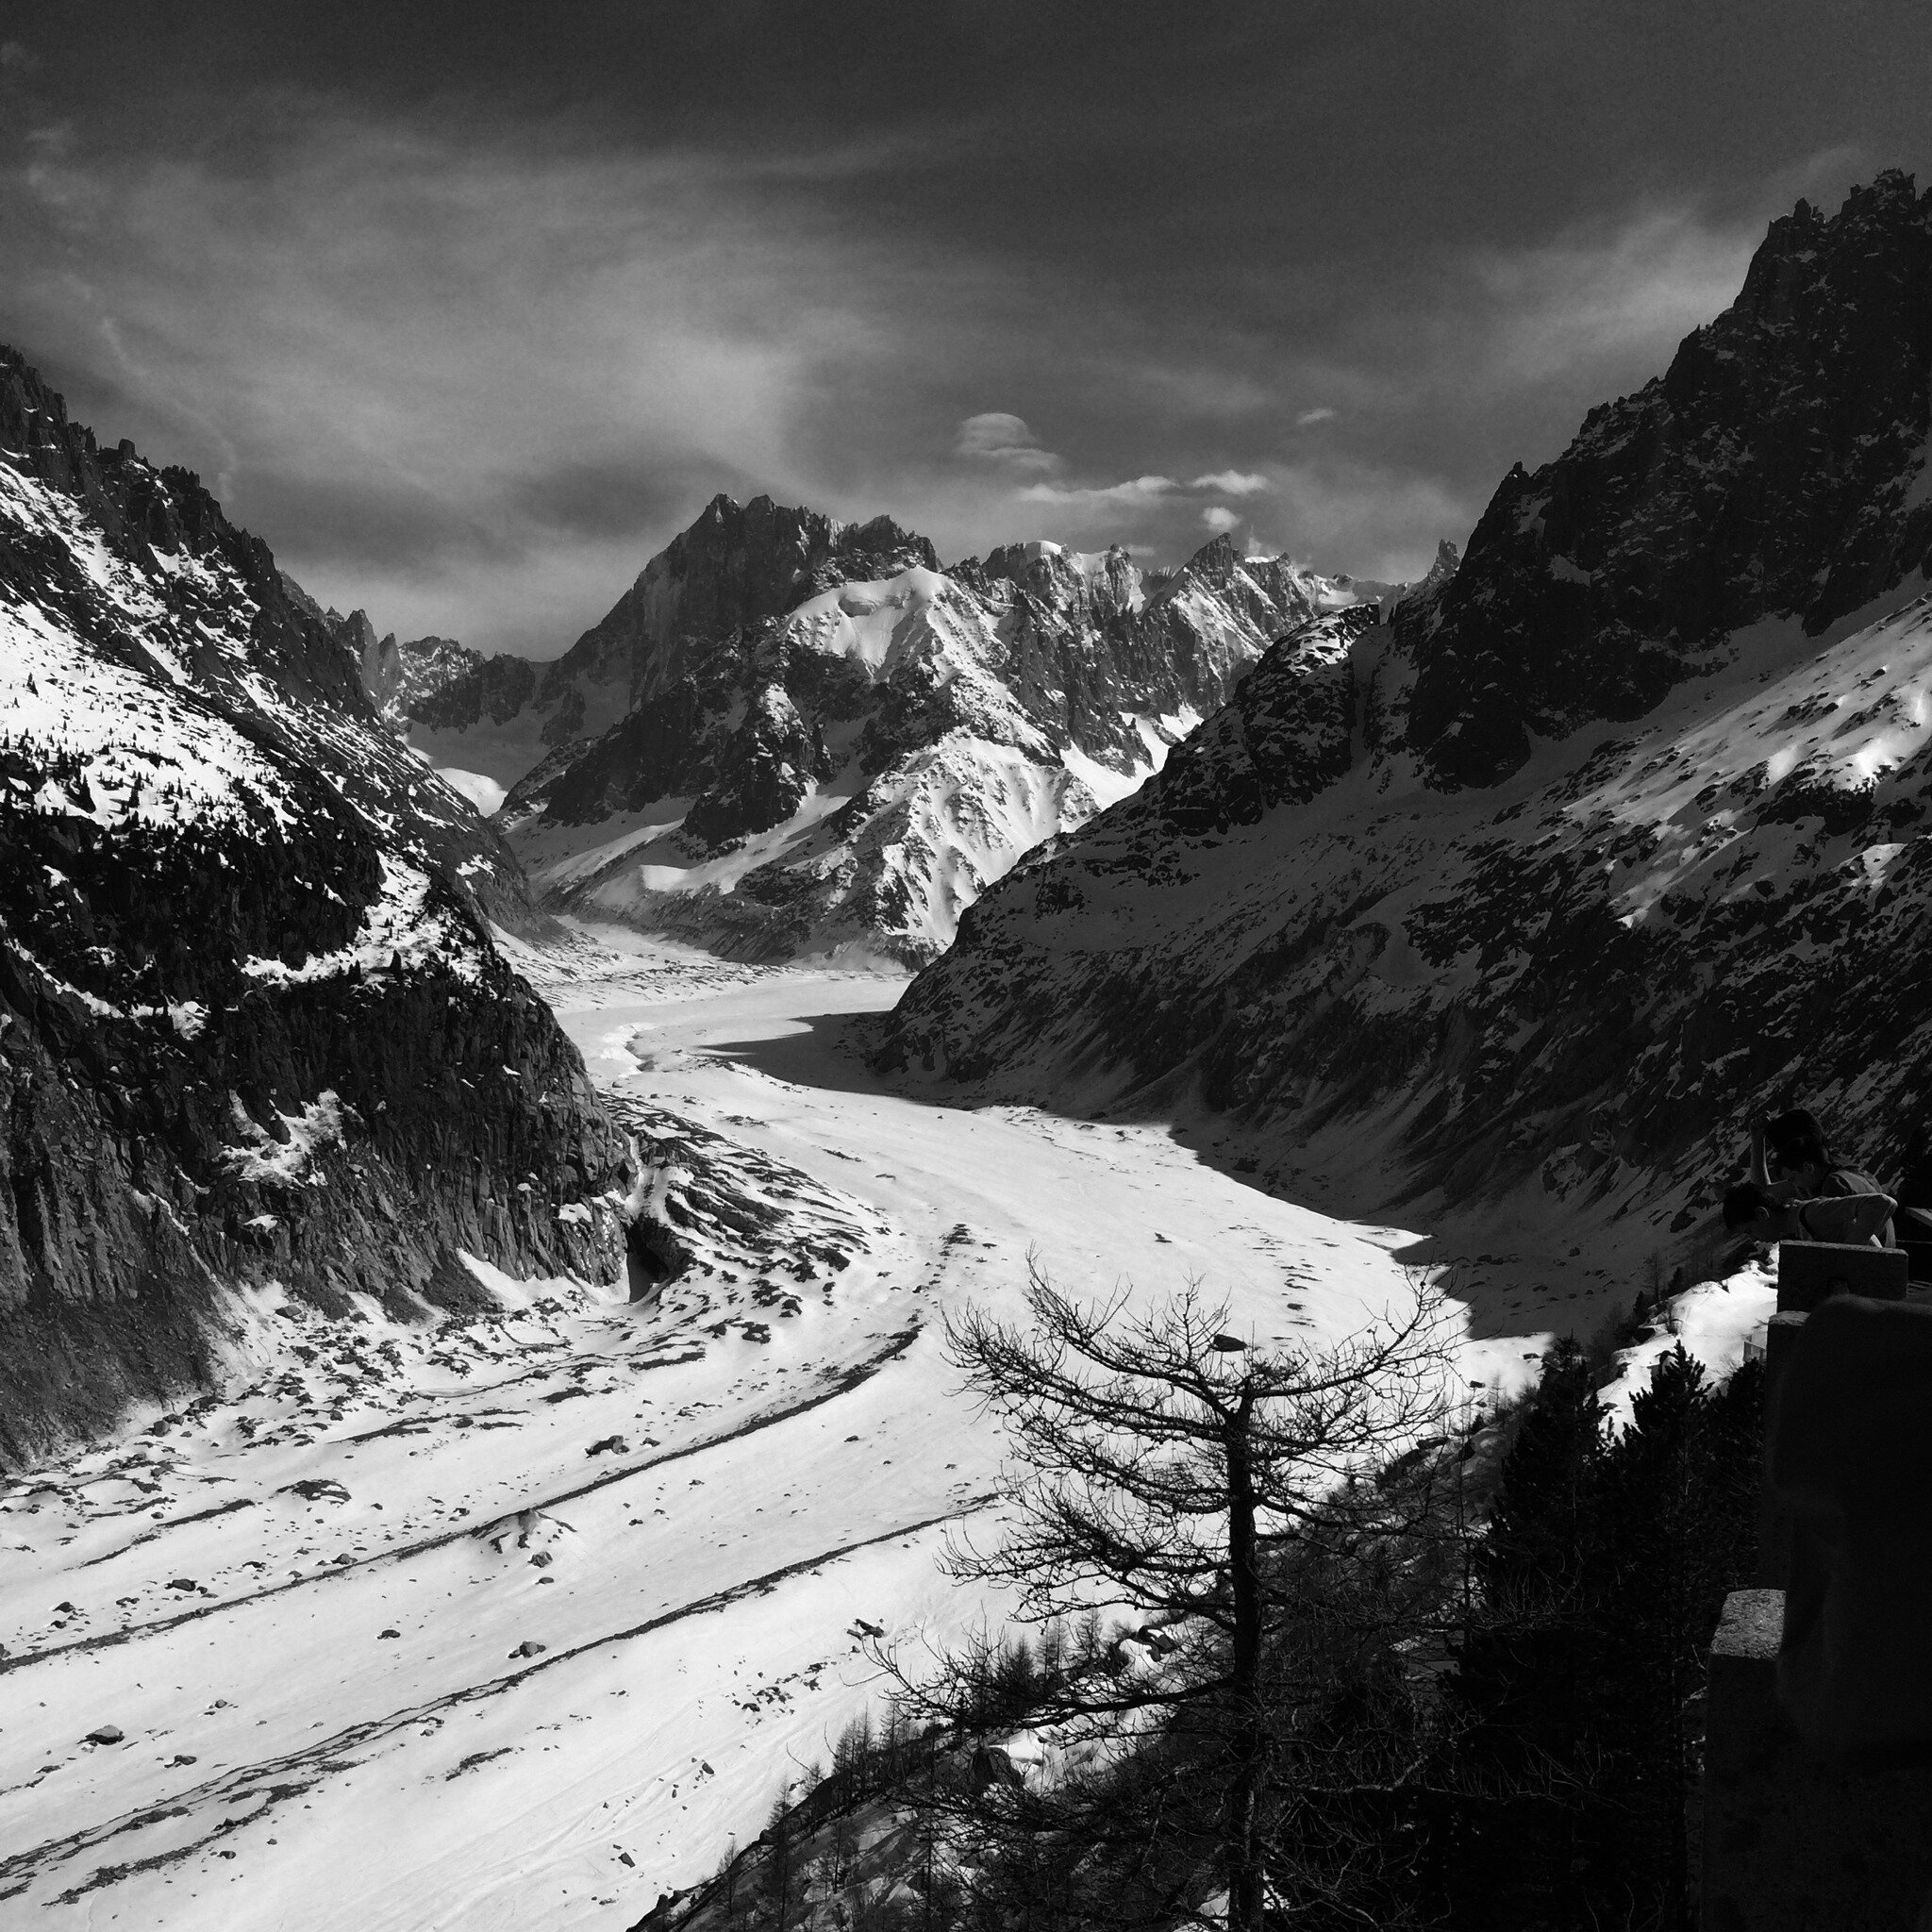 The Mer de Glac&eacute;, The Sea of Ice, Chamonix.
circa Spring, 2015.

Lost in the frozen beauty of the Mer de Glac&eacute; 🏔 

Nature's masterpiece carved by time and ice. Every crack and crevasse tells a story of resilience.

Shop the worlds only